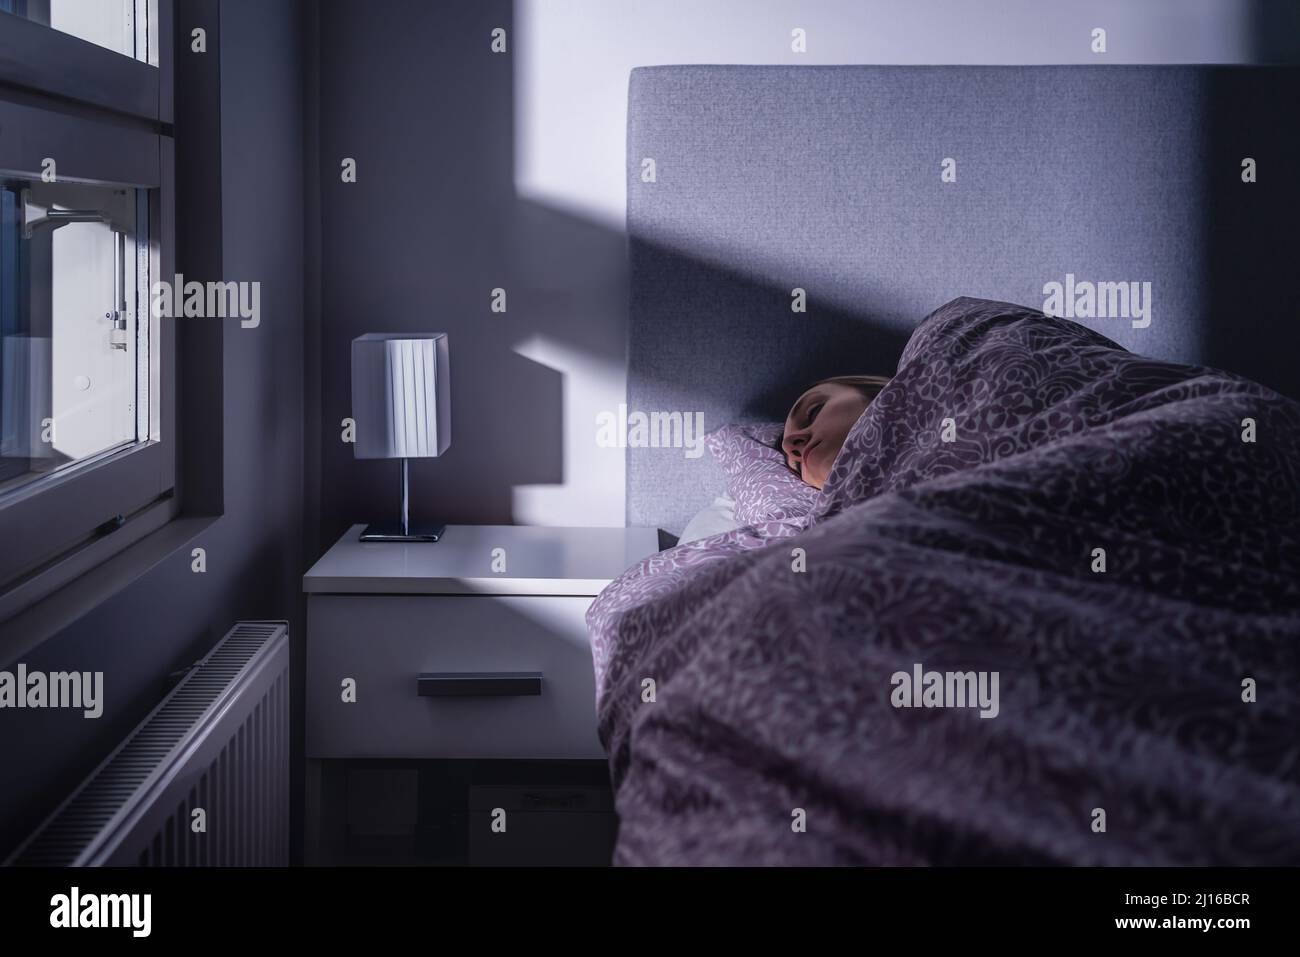 Sleeping woman in bed at night in dark bedroom. Person resting. Asleep under cover and blanket. Cold room at home. Tired lady in peaceful dream. Stock Photo